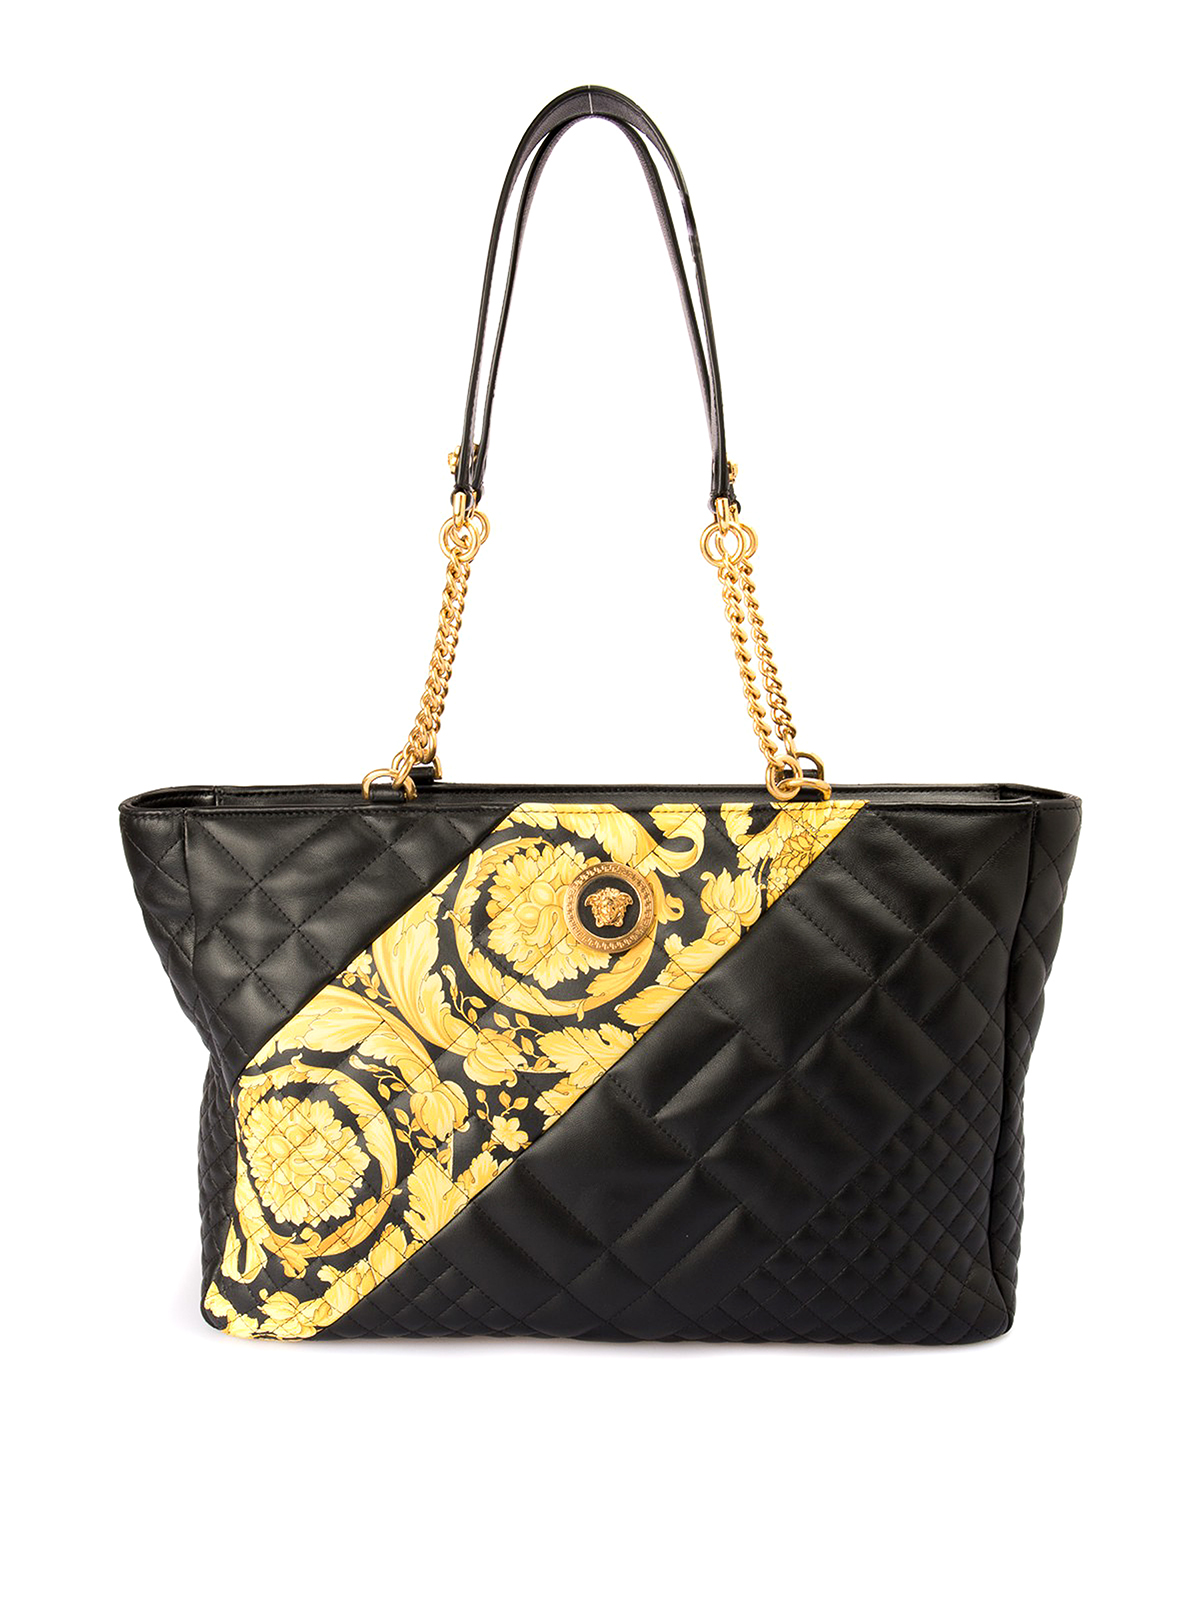 VERSACE QUILTED LEATHER TOTE